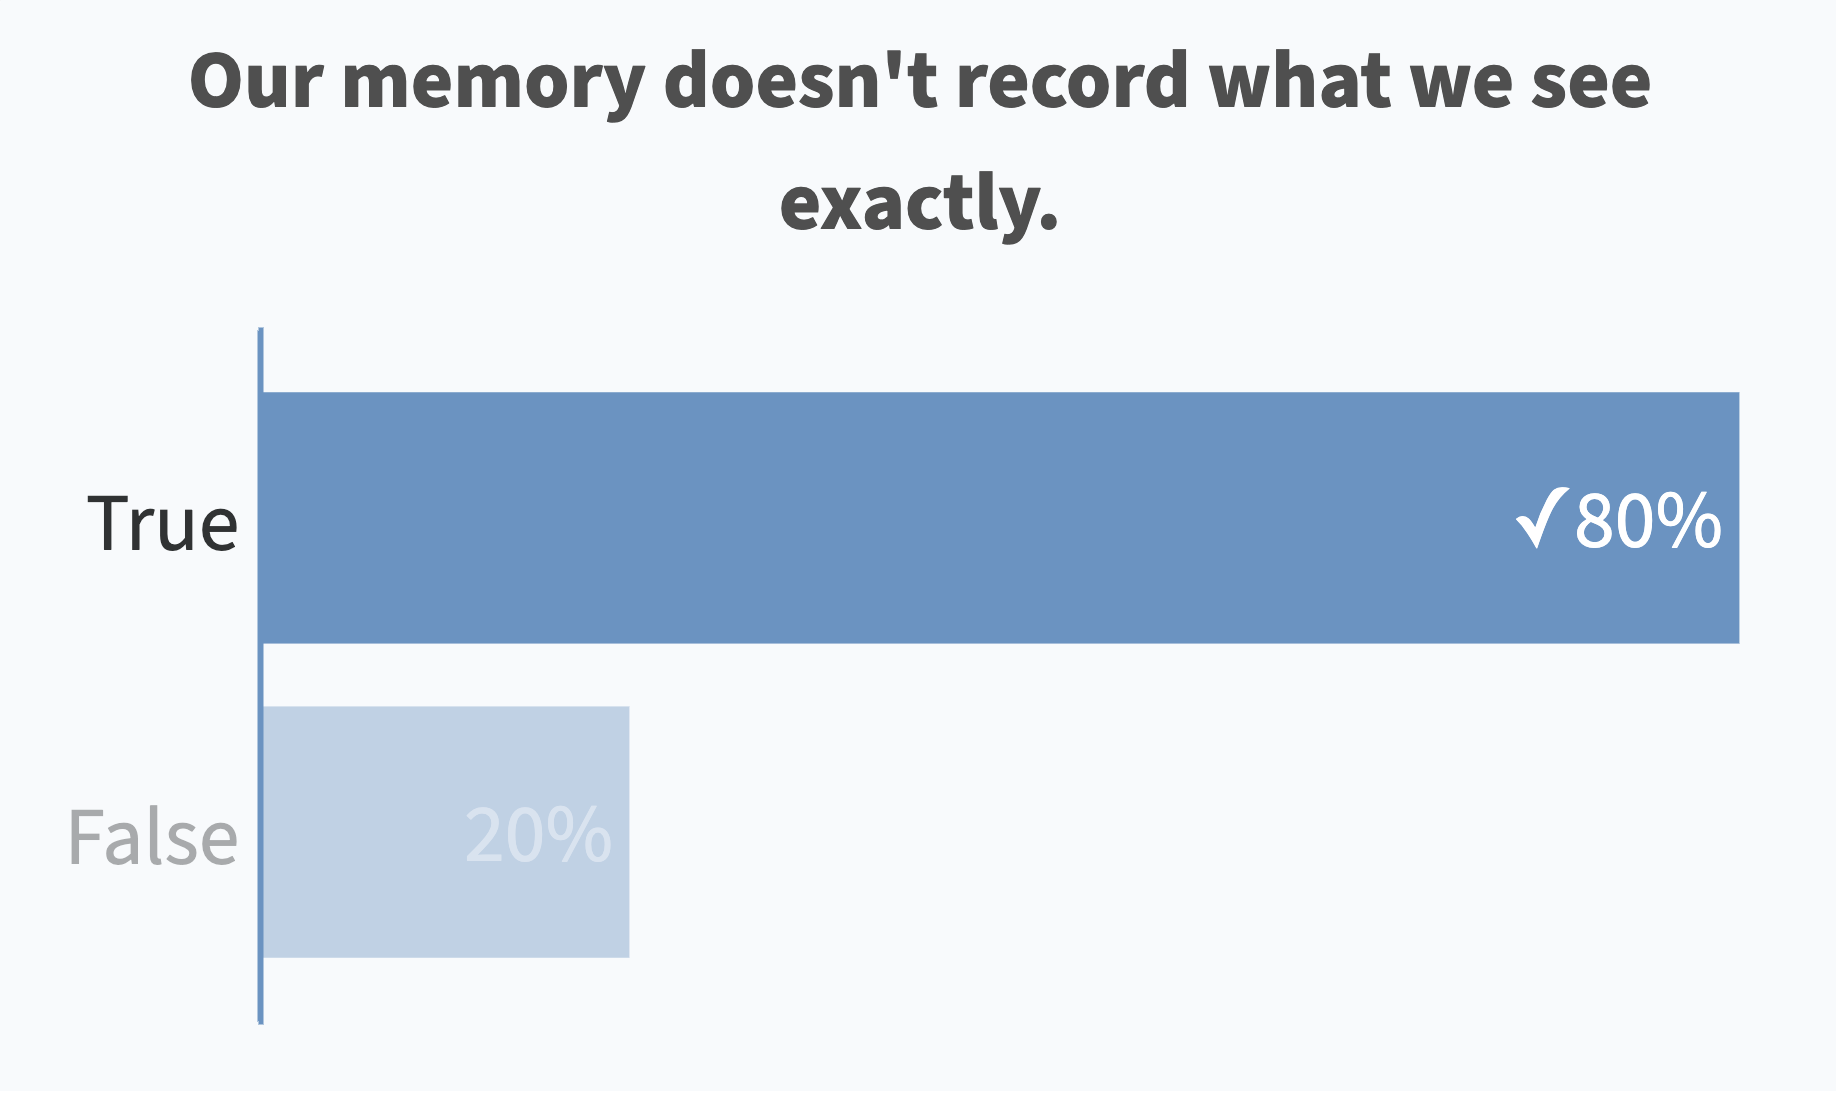 Memory doesn't record what we see exactly. (True: 80% correct)